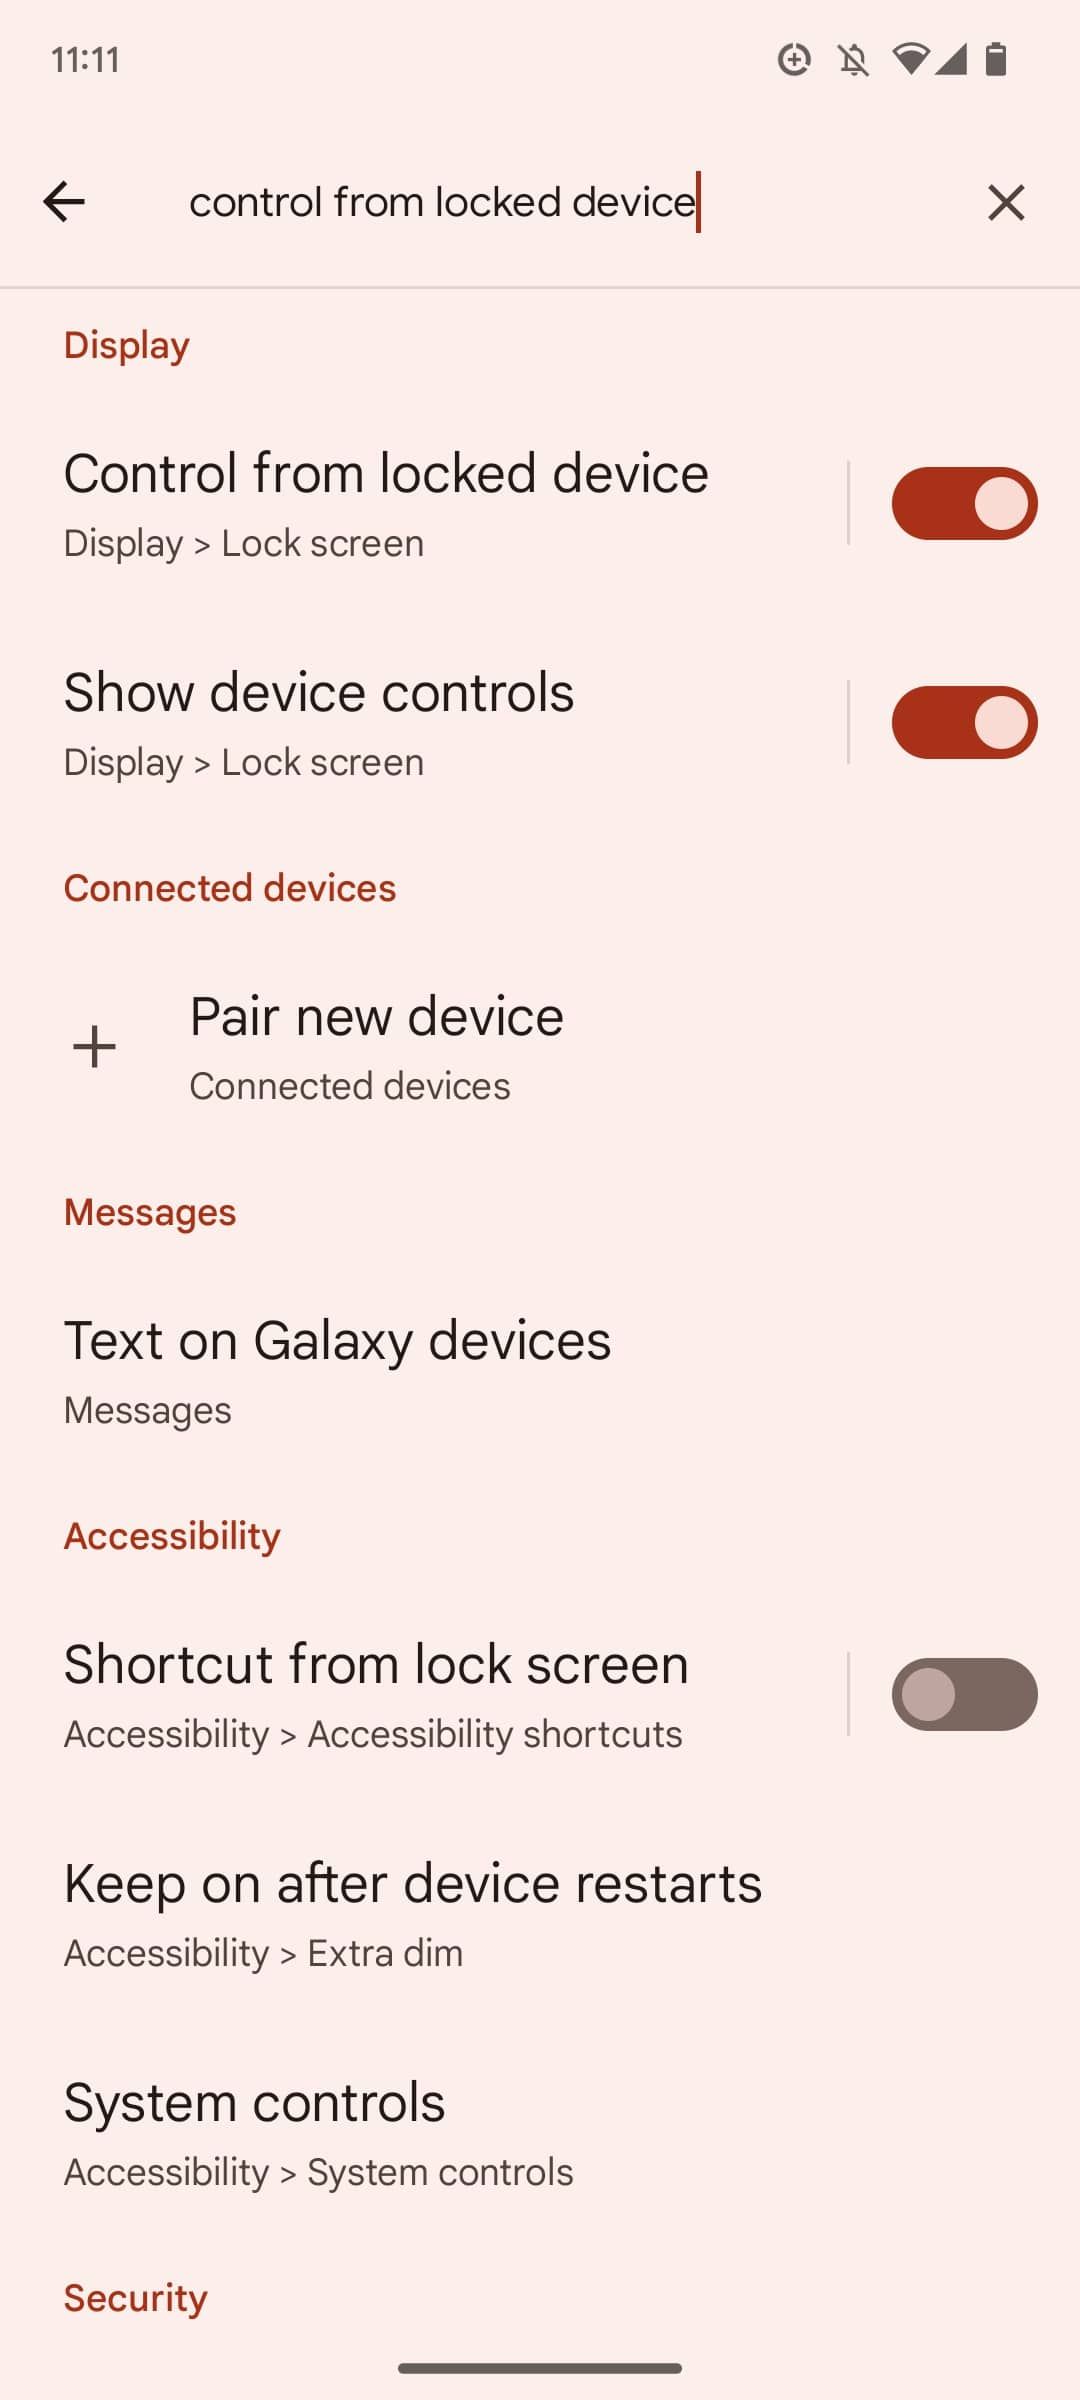 android-13-control-from-locked-device